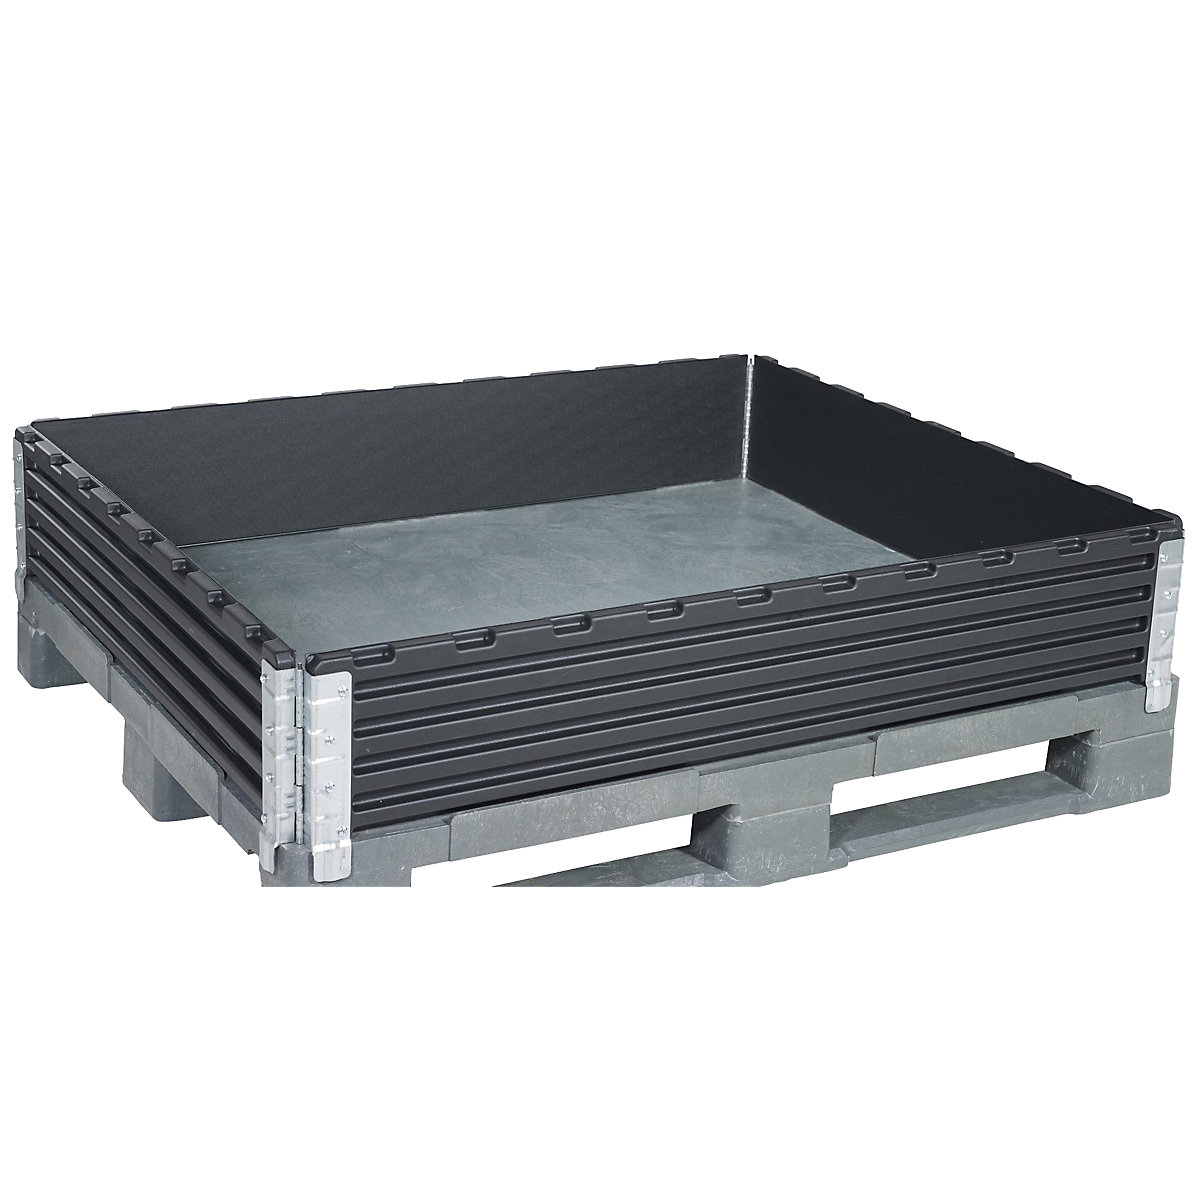 Plastic pallet collar, pack of 2, for 1200 x 1000 mm industrial pallet, diagonally folding, with 4 hinges, 10+ packs